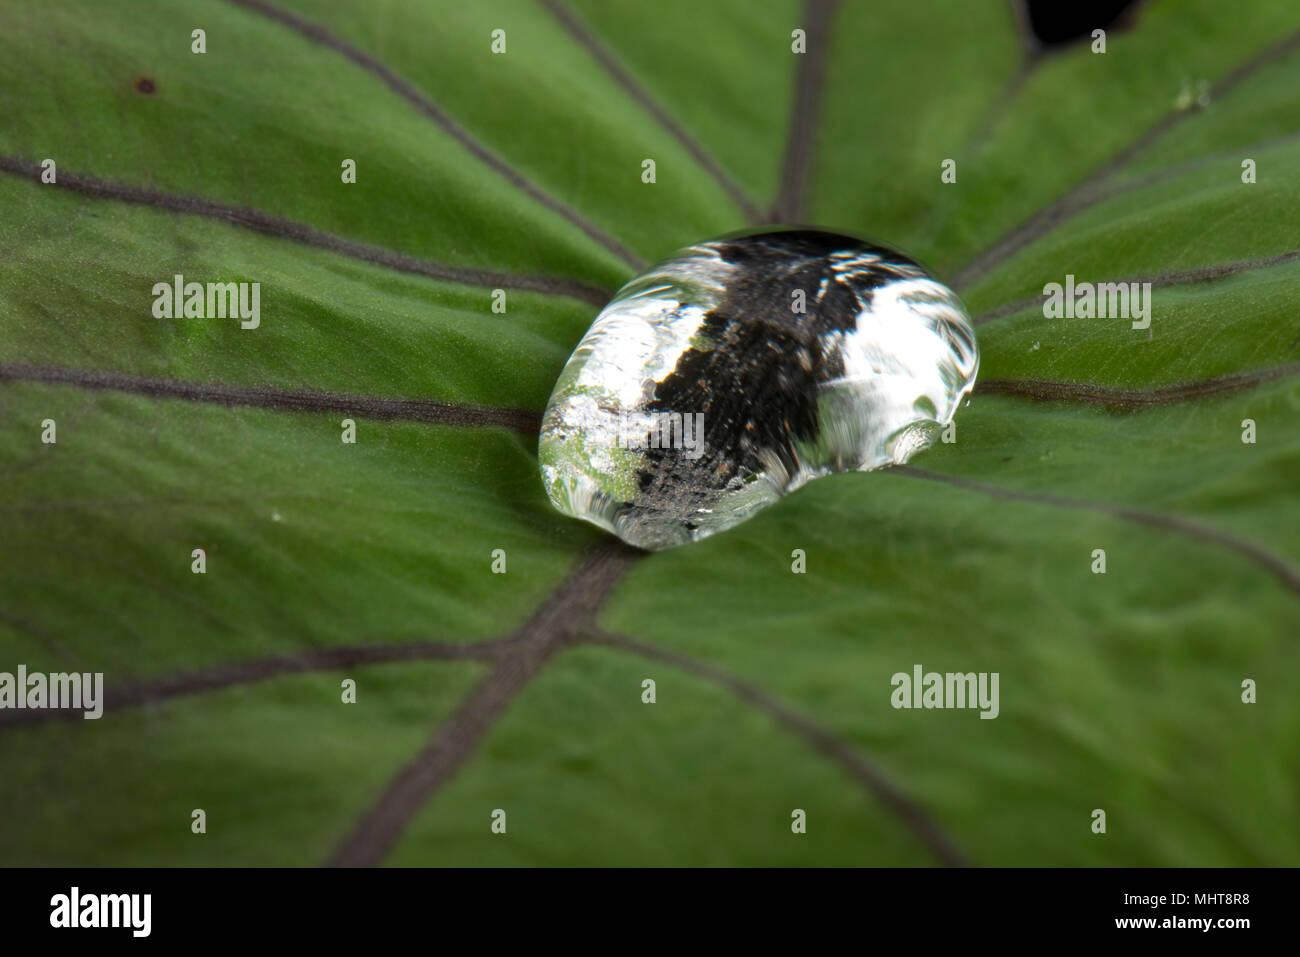 Large water droplet sitting on and repelled by the waxy surface of a taro leaf, Colocasia esculenta Stock Photo